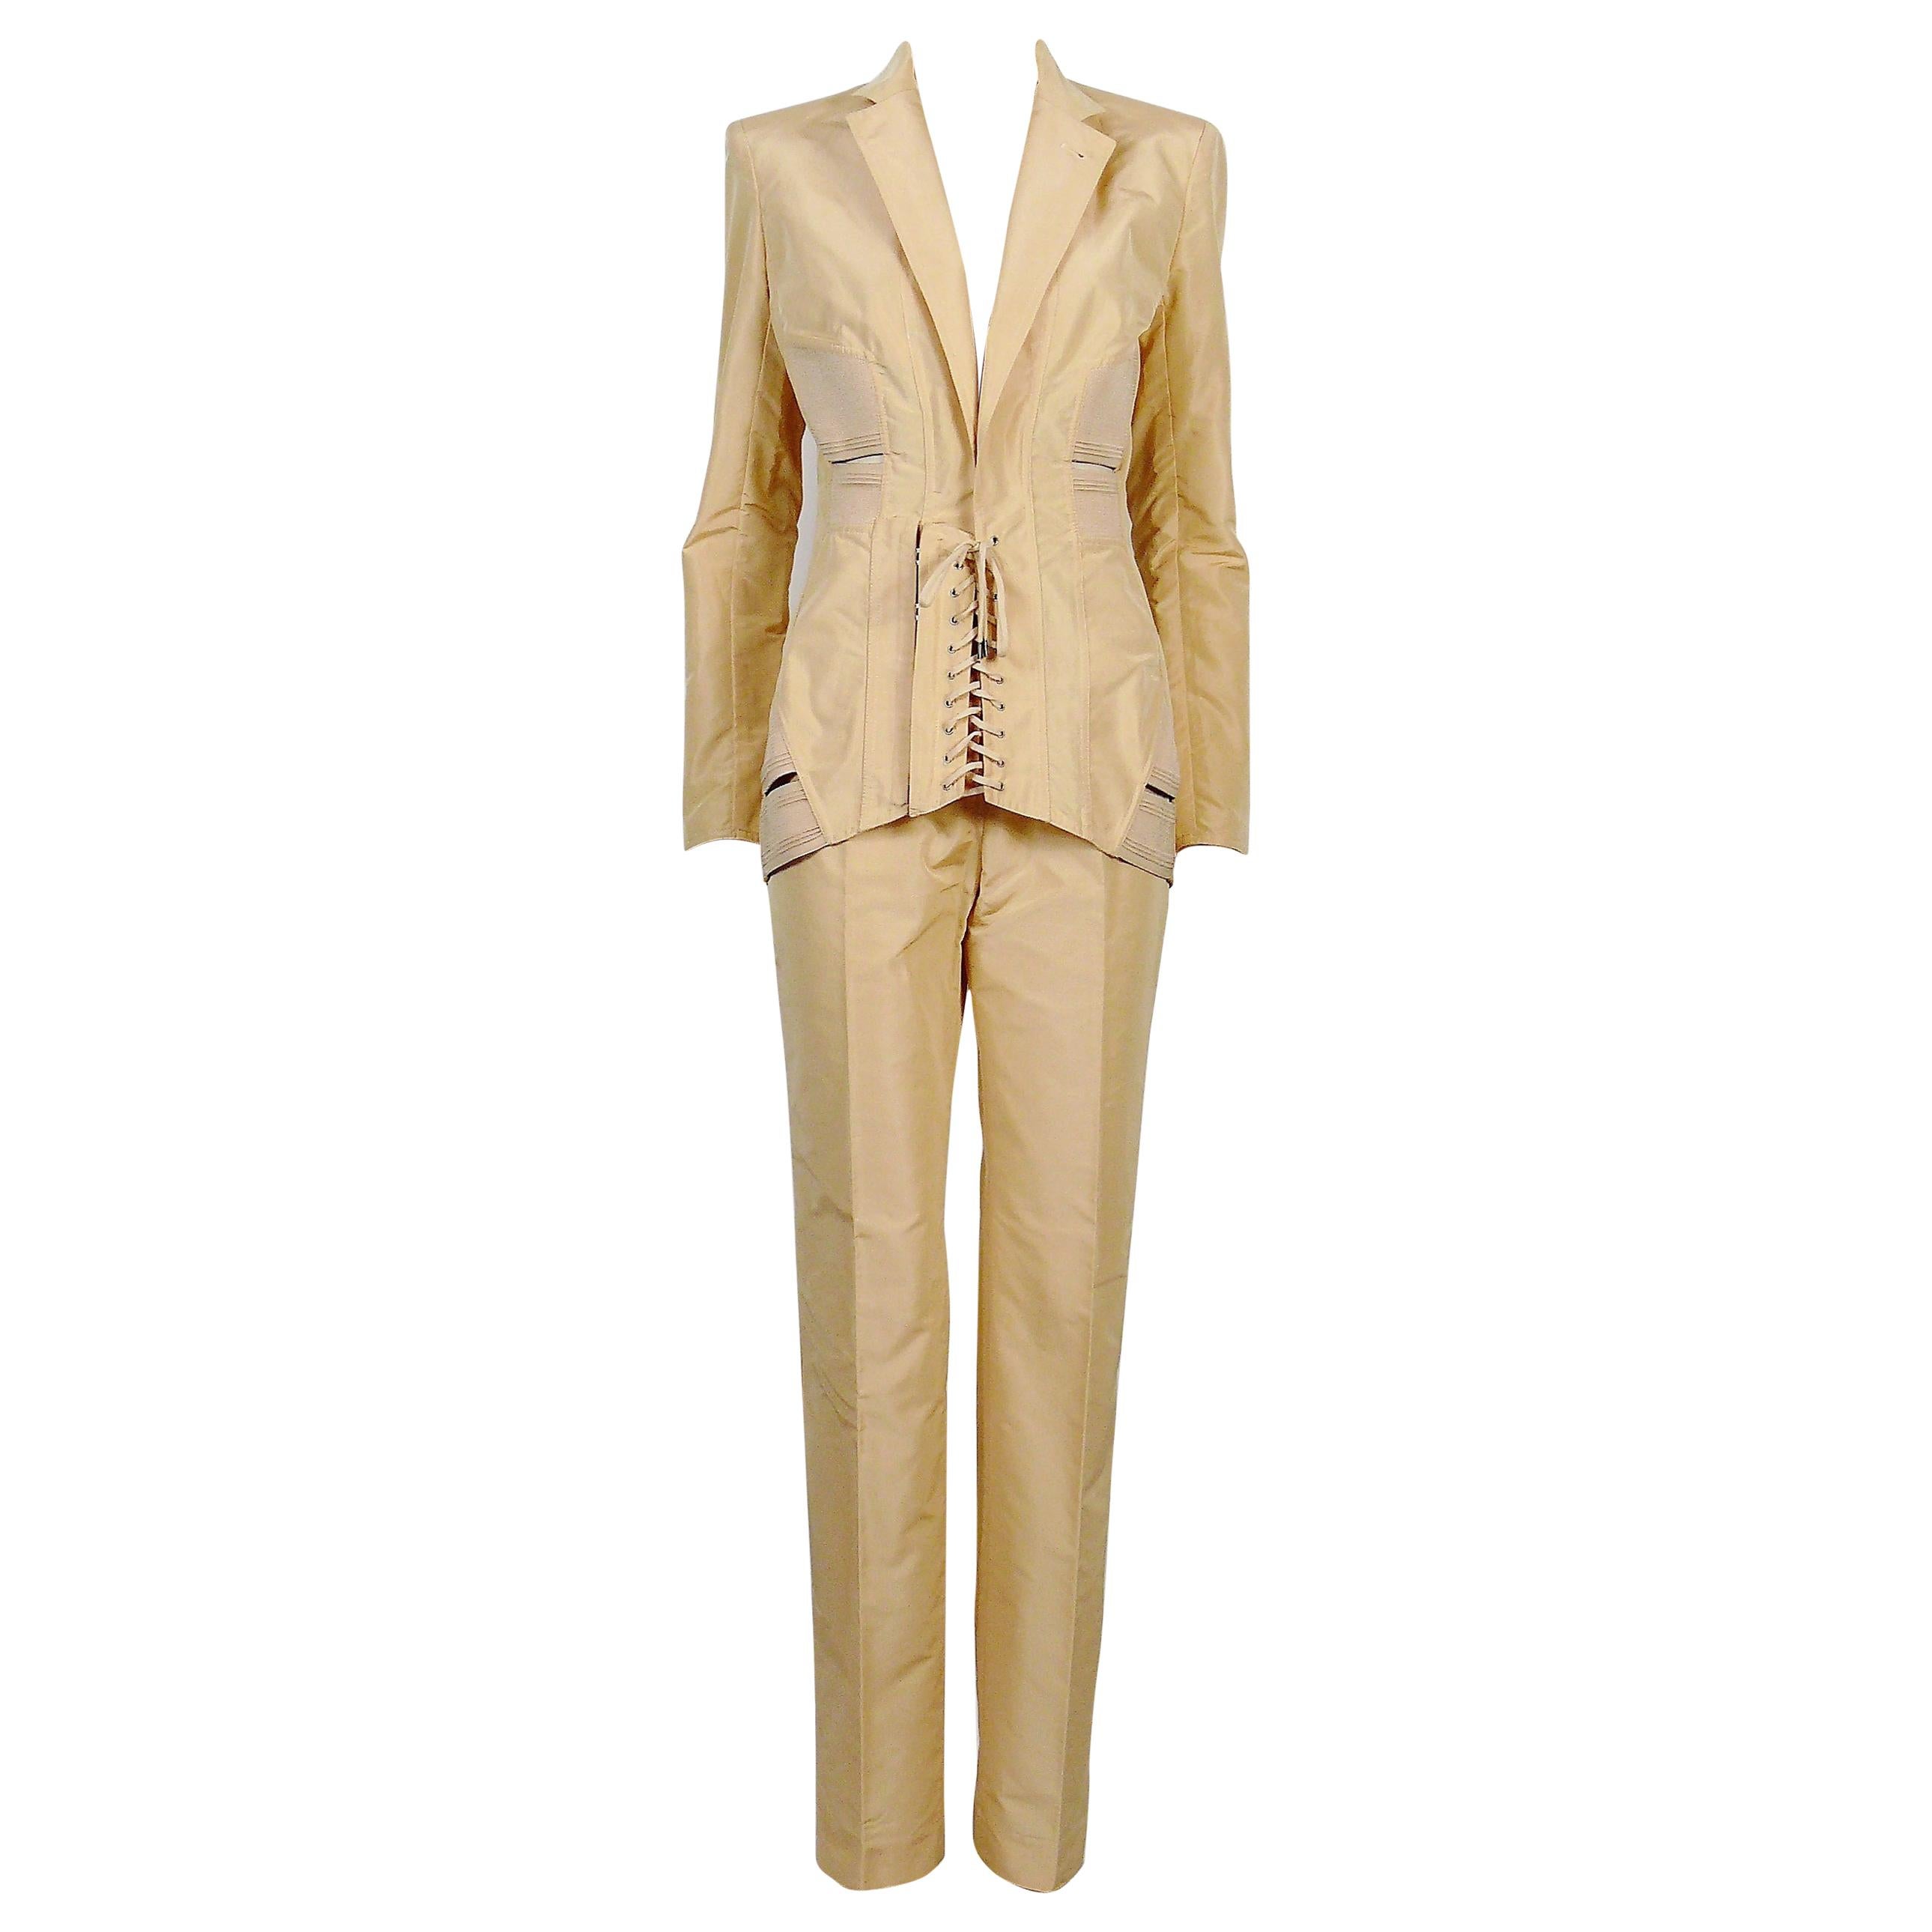 Jean Paul Gaultier Iconic Vintage Peach Corset-Inspired Pant Suit USA Size 6